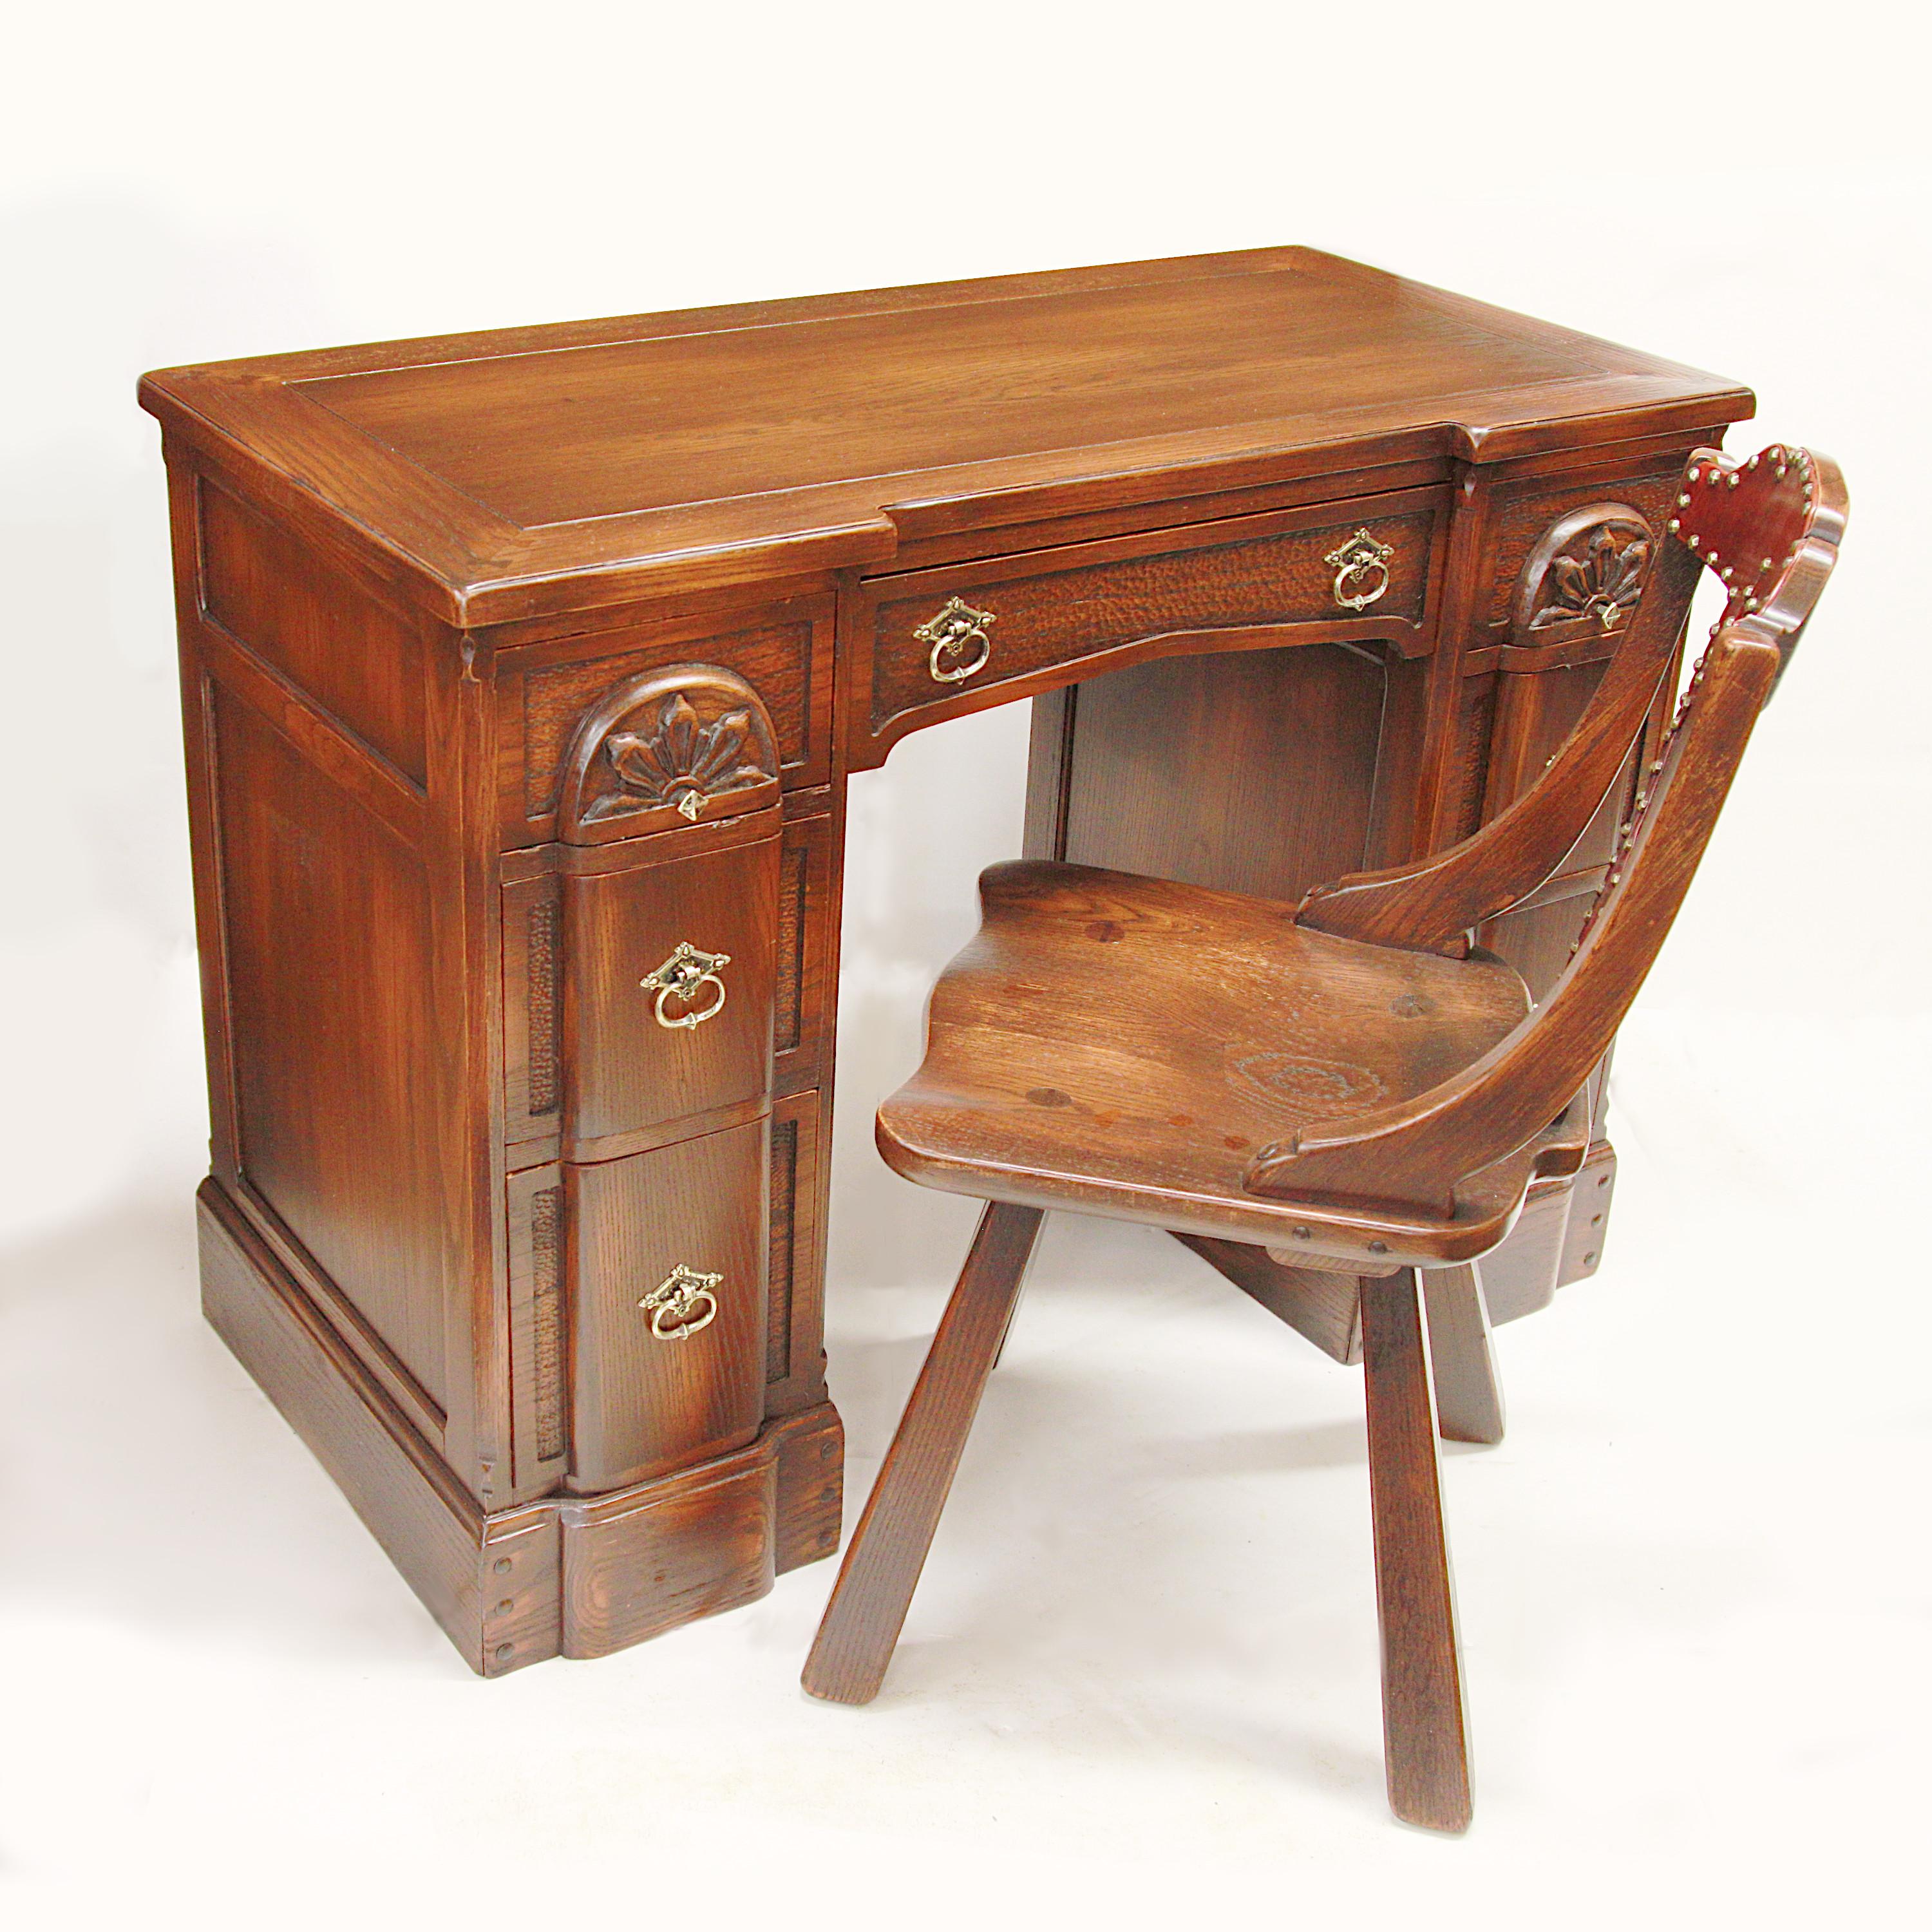 Excellent vintage writing desk in the Viking Oak style by the Romweber Furniture Co. of Batesville, IN. This charming desk features wonderful relief carved details, solid oak construction, and solid brass hardware. Desk is paired with a matching